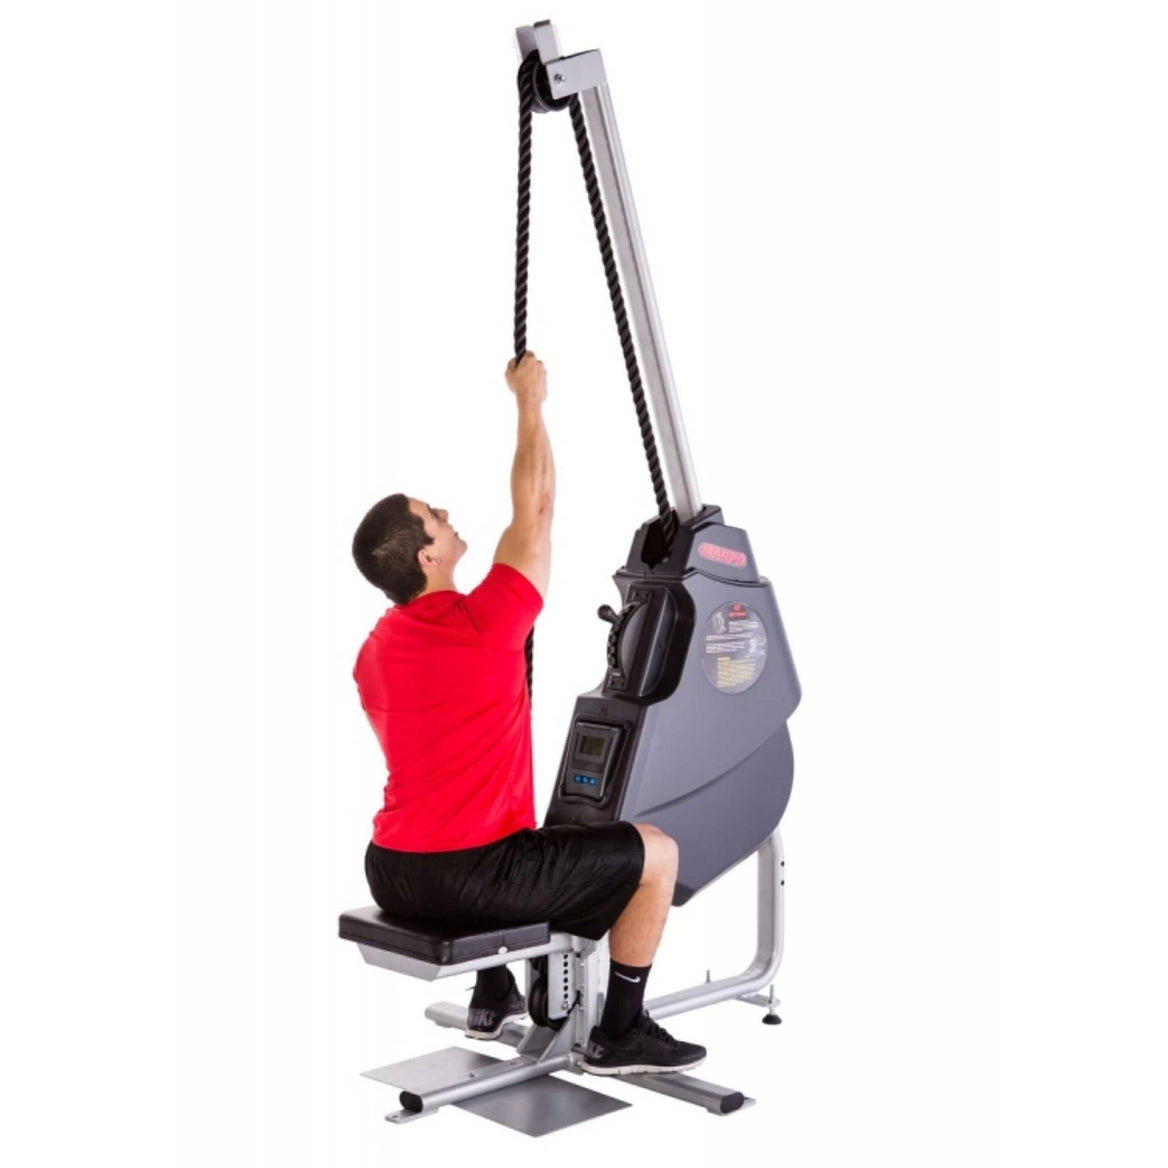 Rope Pull Machine Image with the Marpo VLT Rope Trainer